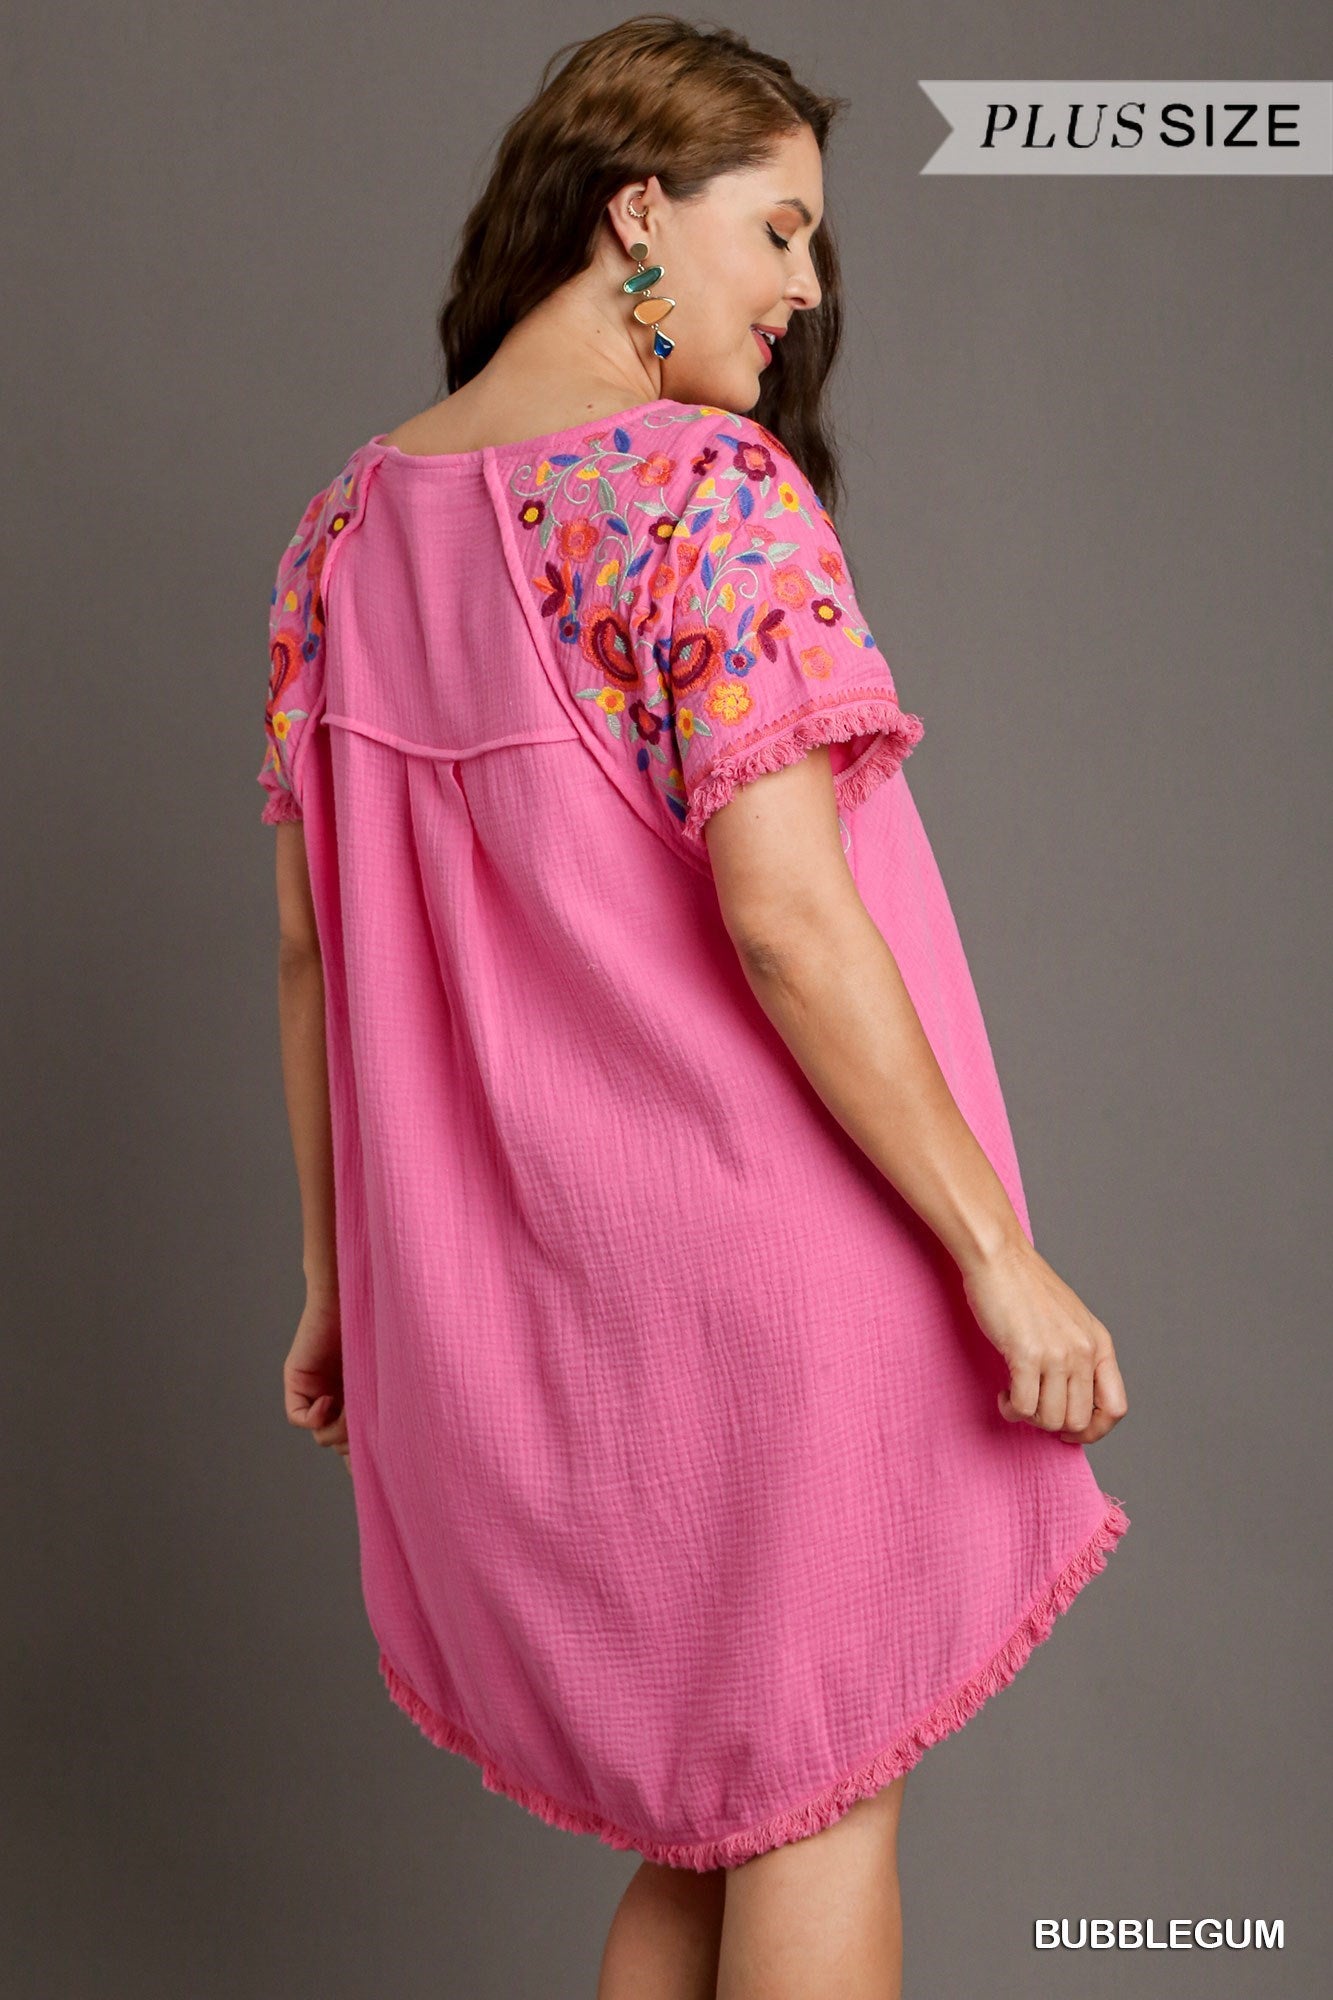 Cotton Candy Pink High/Lo Dress w/ Embroidered Sleeves